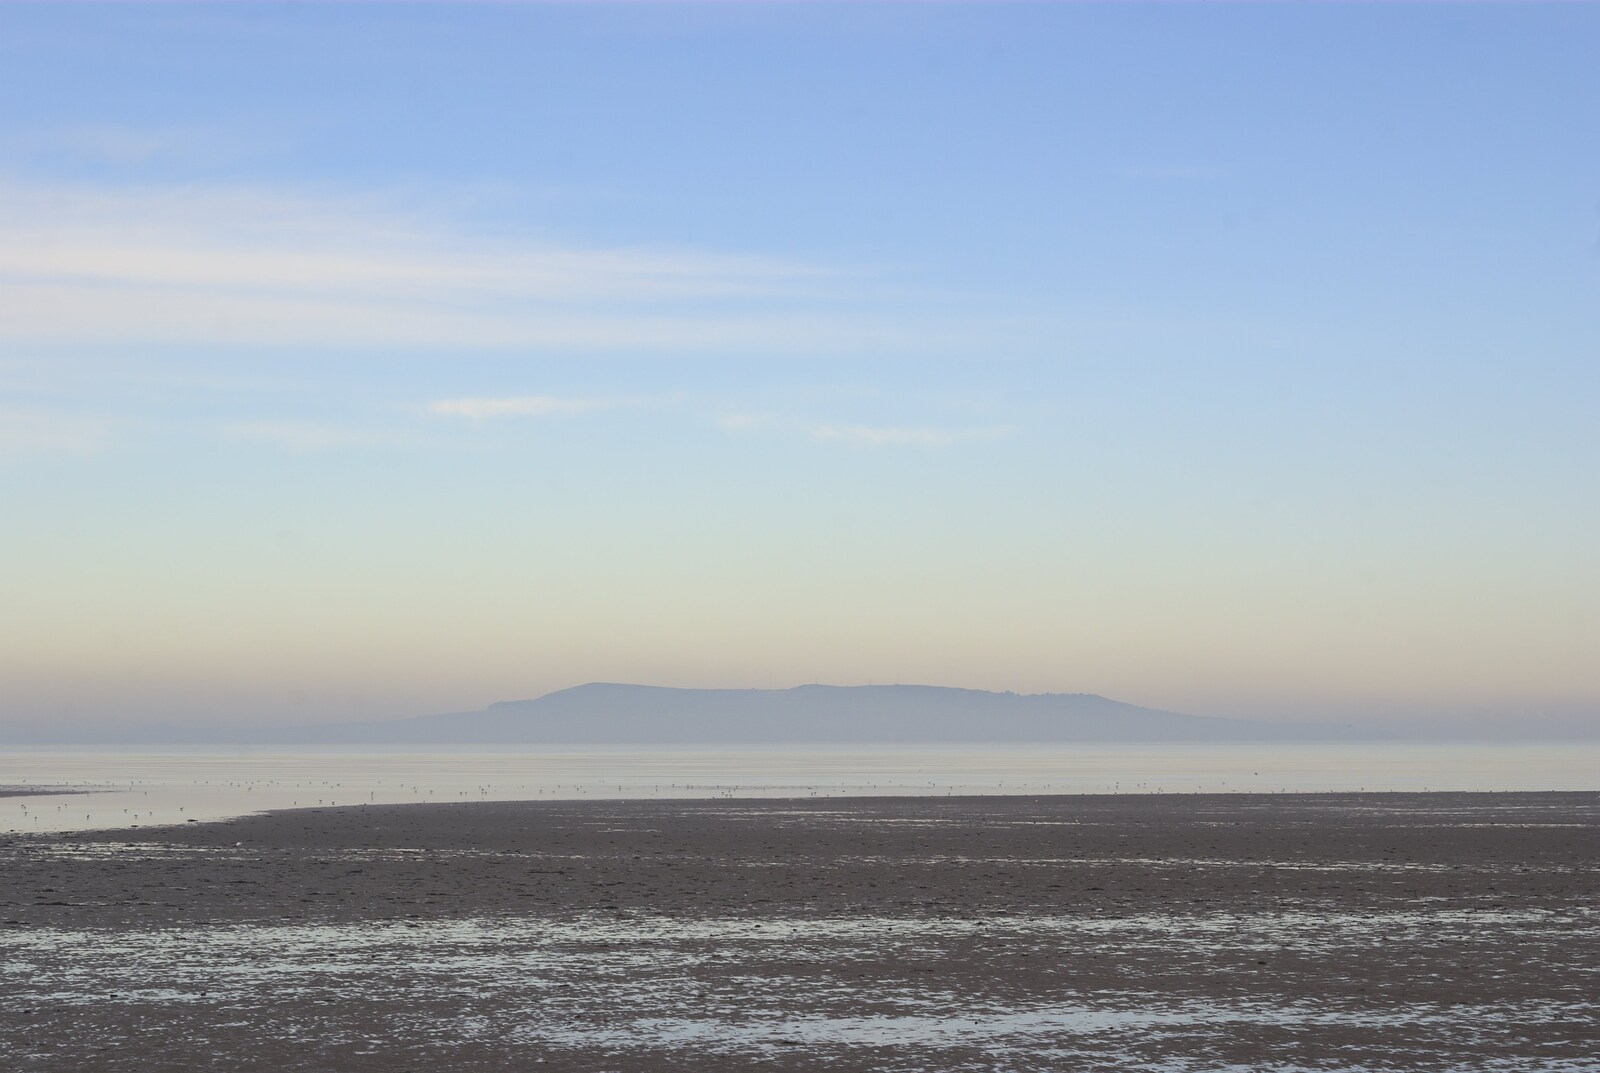 Looking out to Howth from Christmas at Number 19, Blackrock, County Dublin, Ireland - 25th December 2009